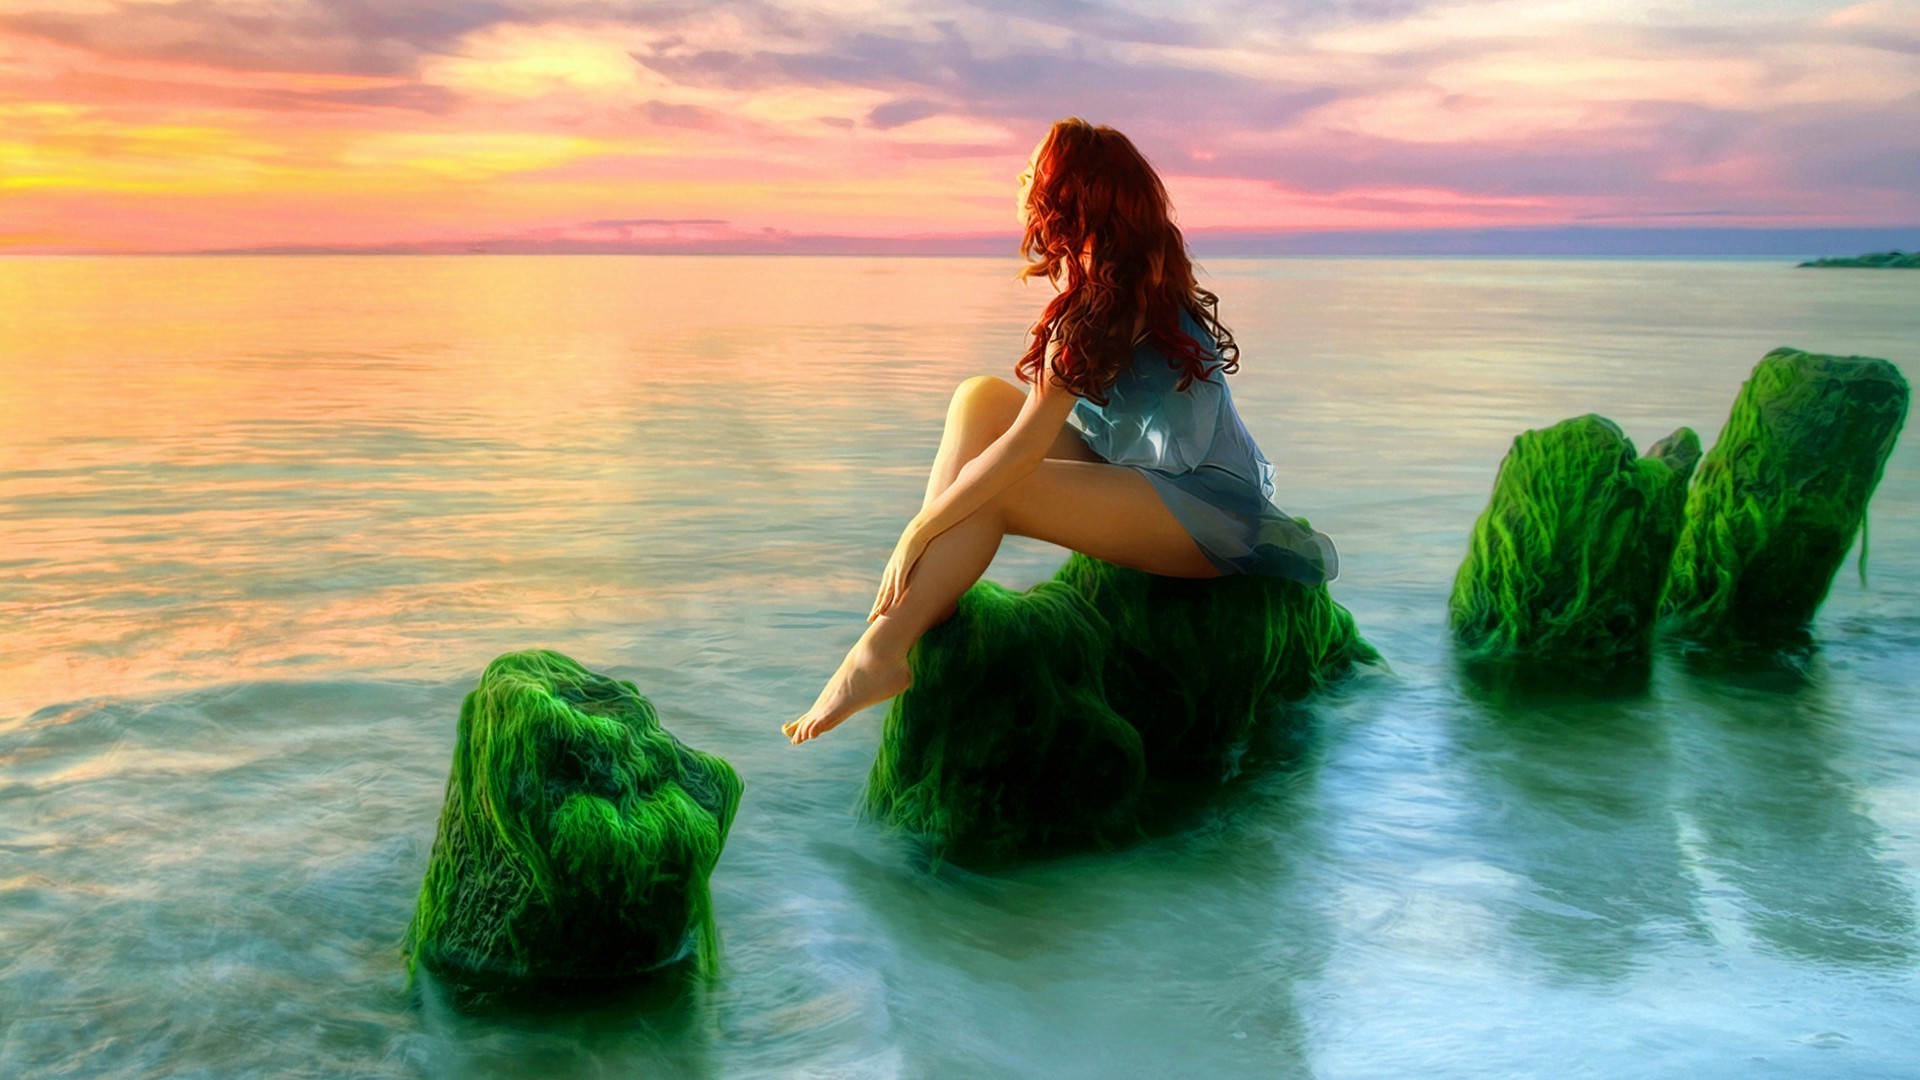 1920x1080 ... dreamer on the mossy stones wallpaper 3197 ...